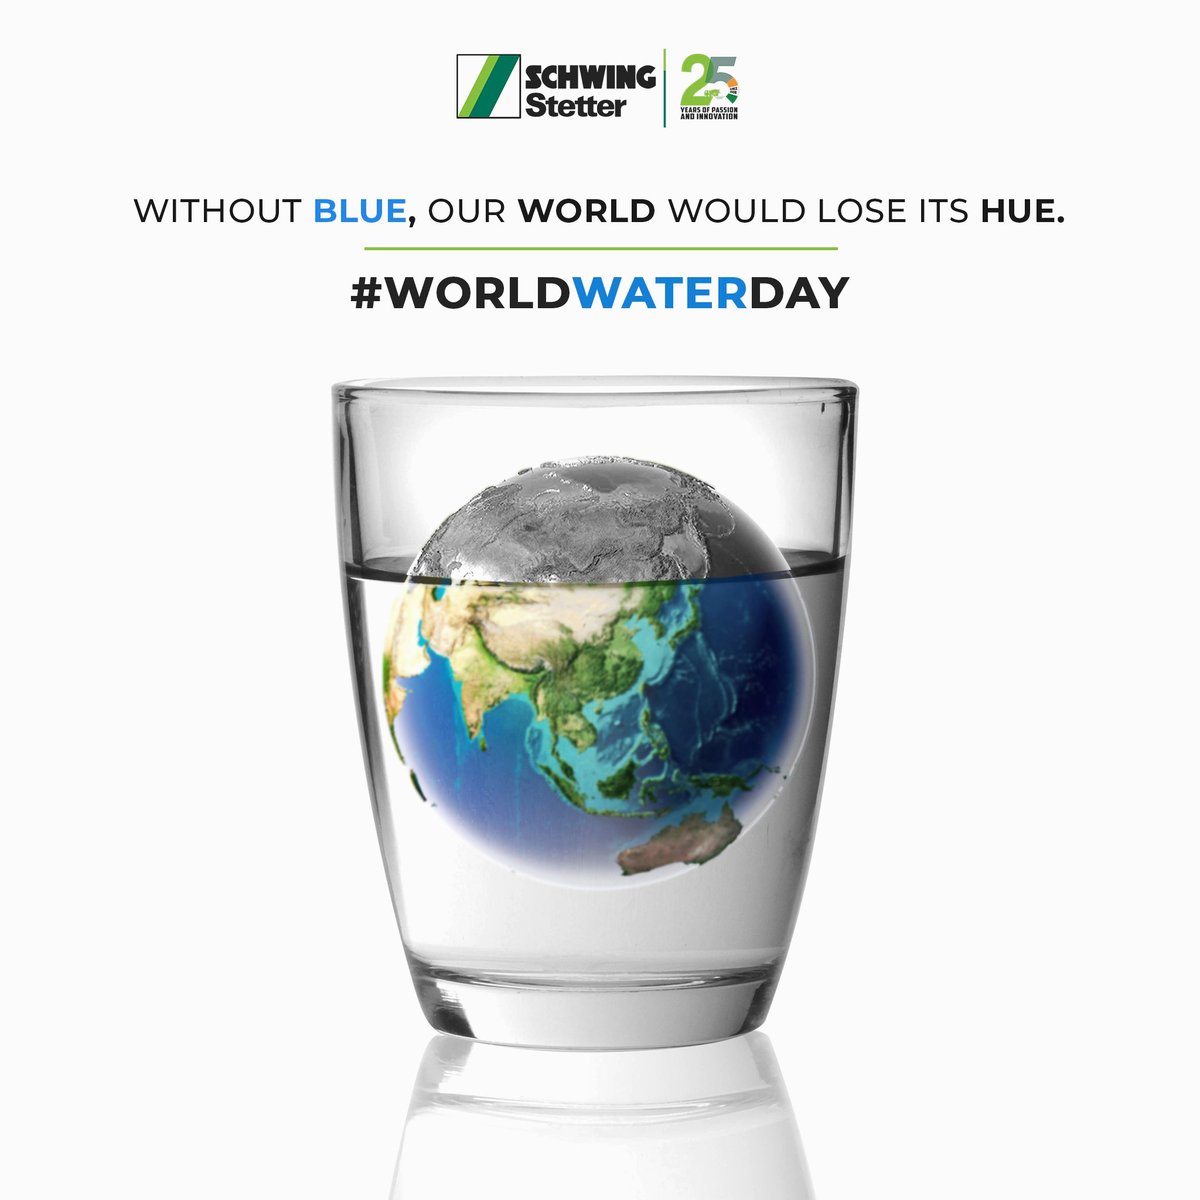 Honouring the precious resource and working towards a more sustainable future !!
Let's pay tribute to this invaluable resource and strive for a greener tomorrow.
.
.
#WorldWaterDay #ValuingWater 
#SCHWINGStetterIndia